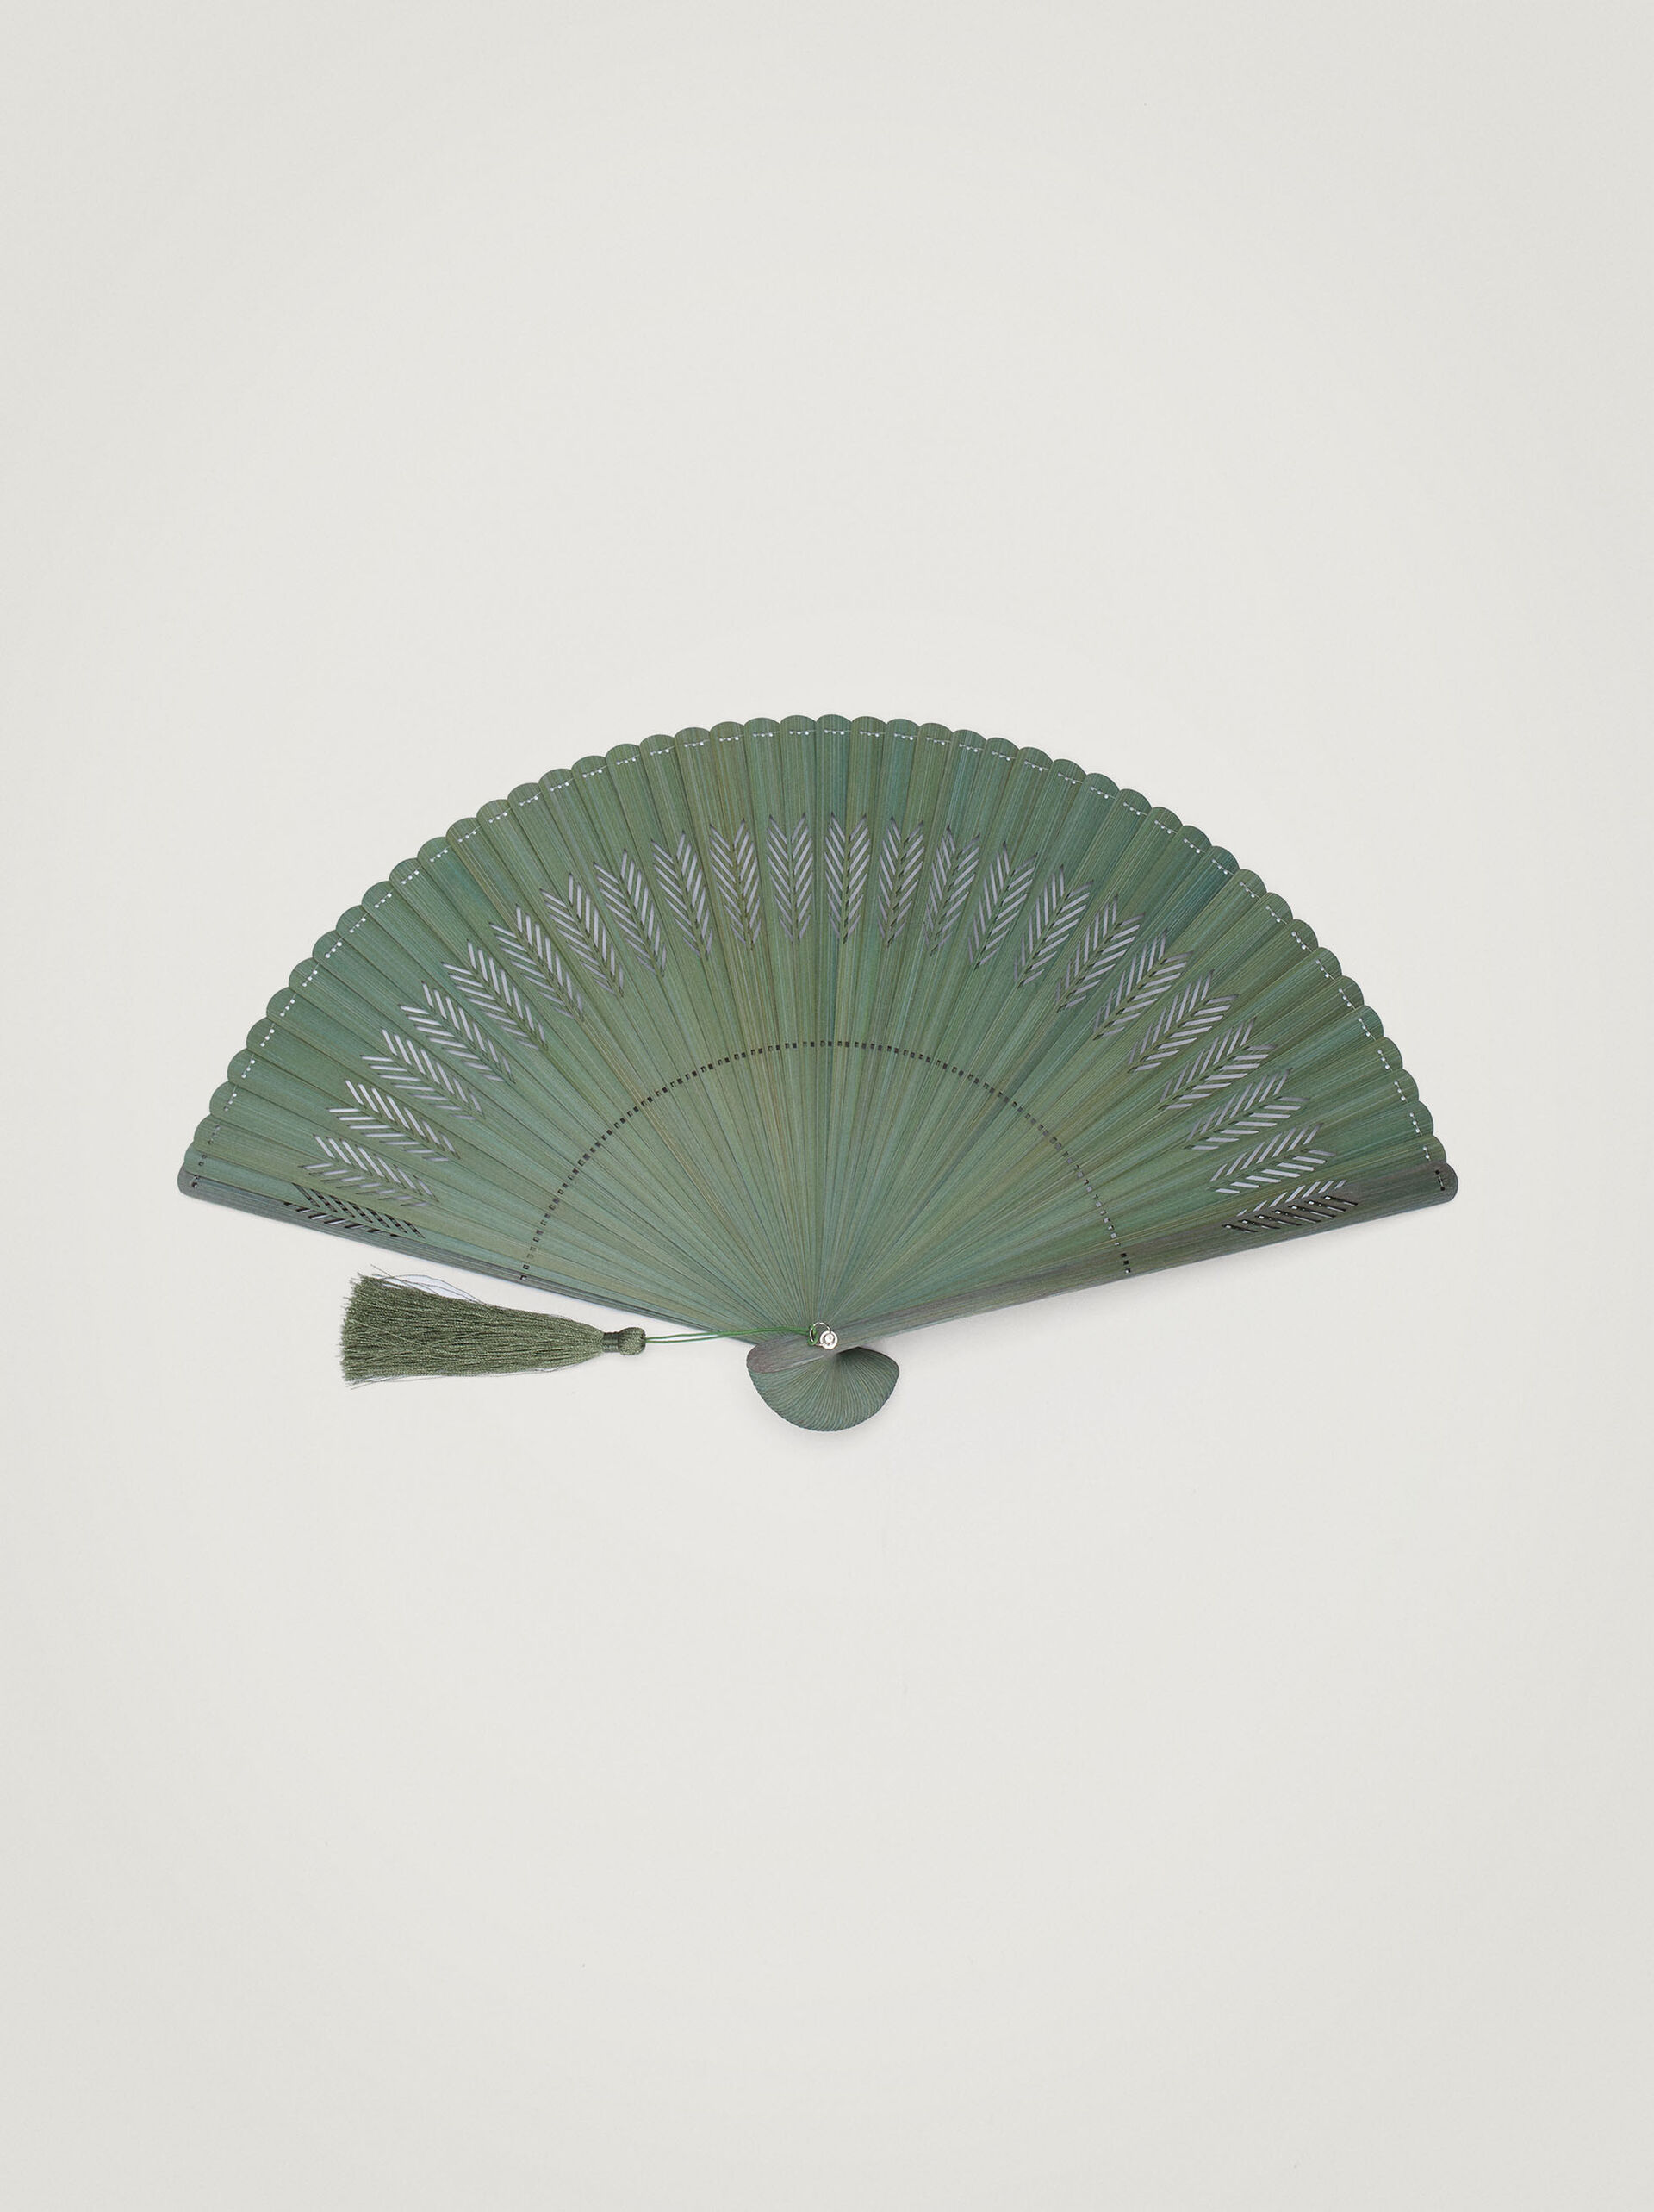 Perforated Fan With Tassel image number 0.0